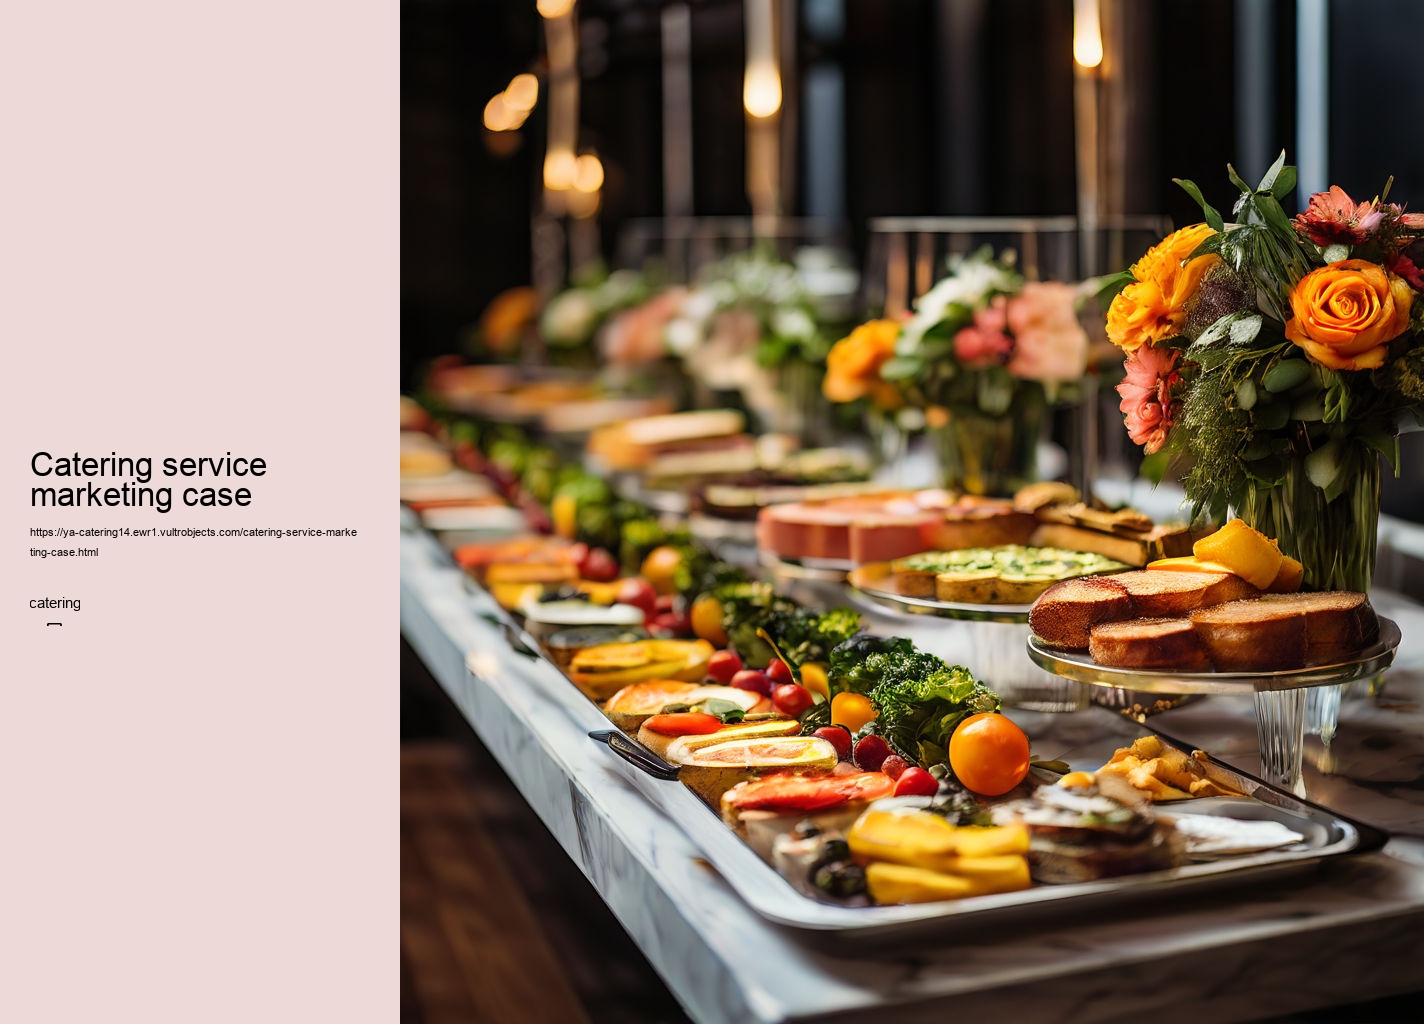 Catering service marketing case